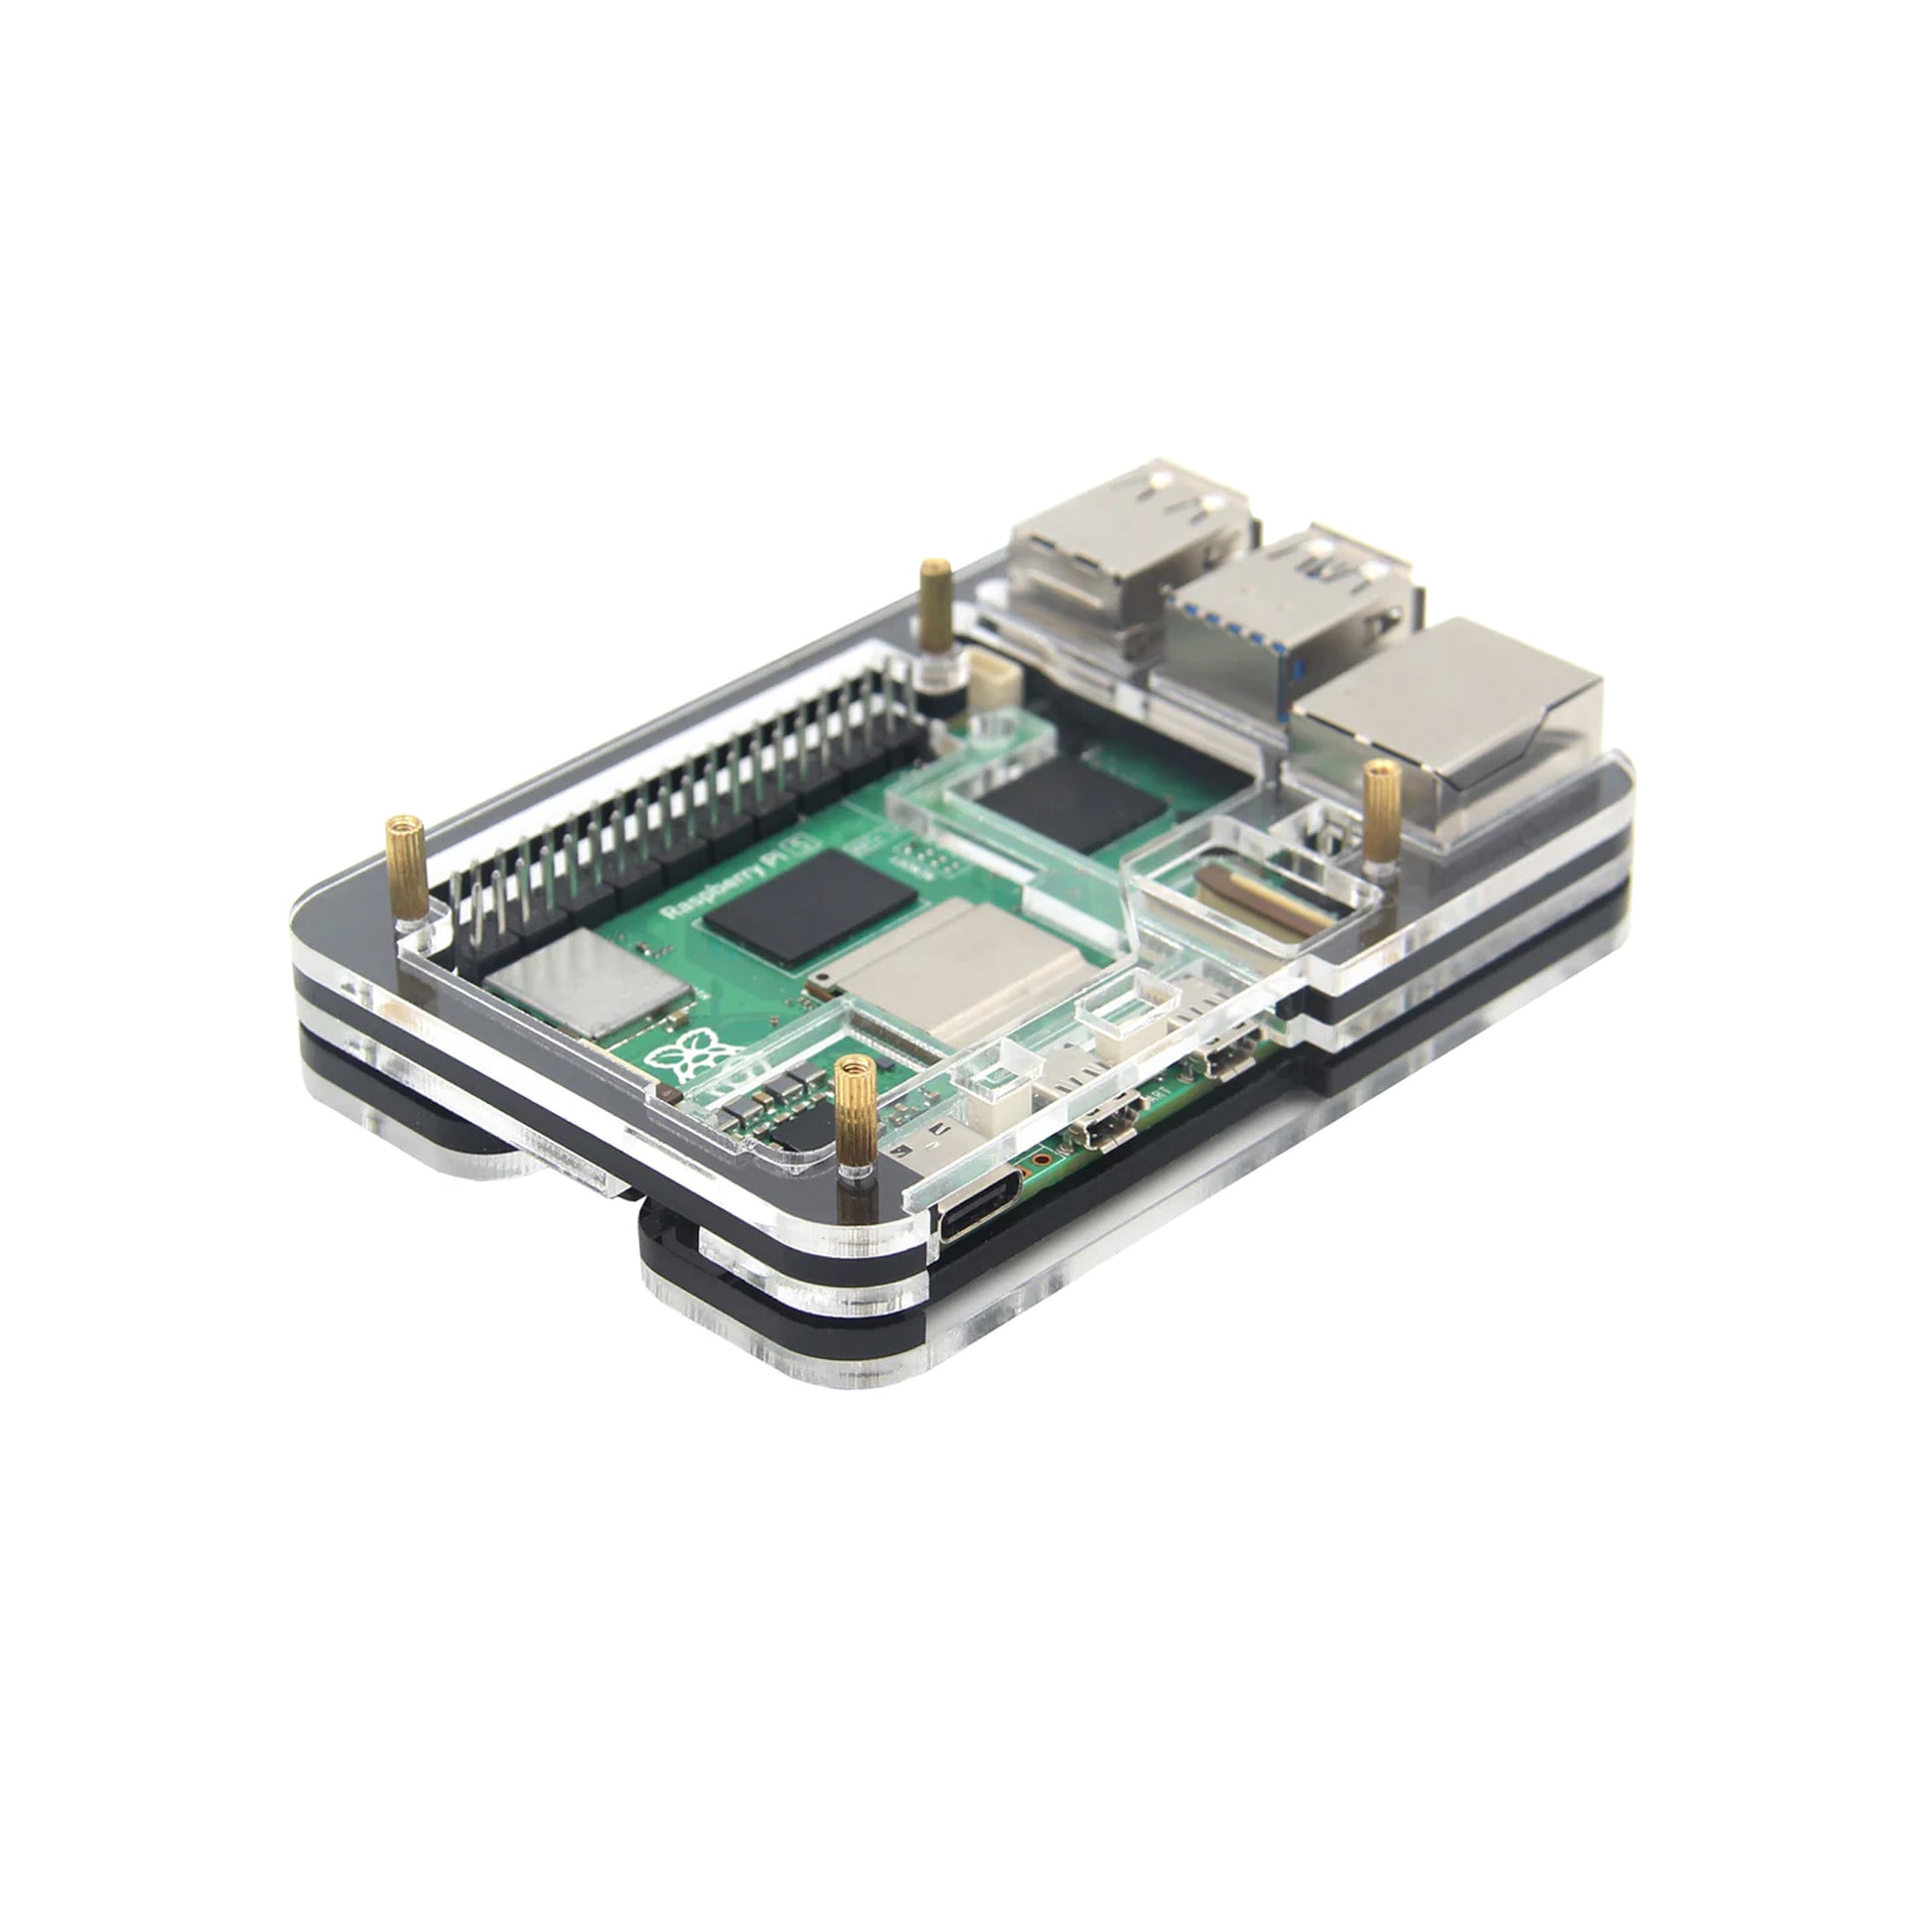 Transparent and Blue Acrylic Case for Raspberry Pi 5, Supports installing  Official Active Cooler